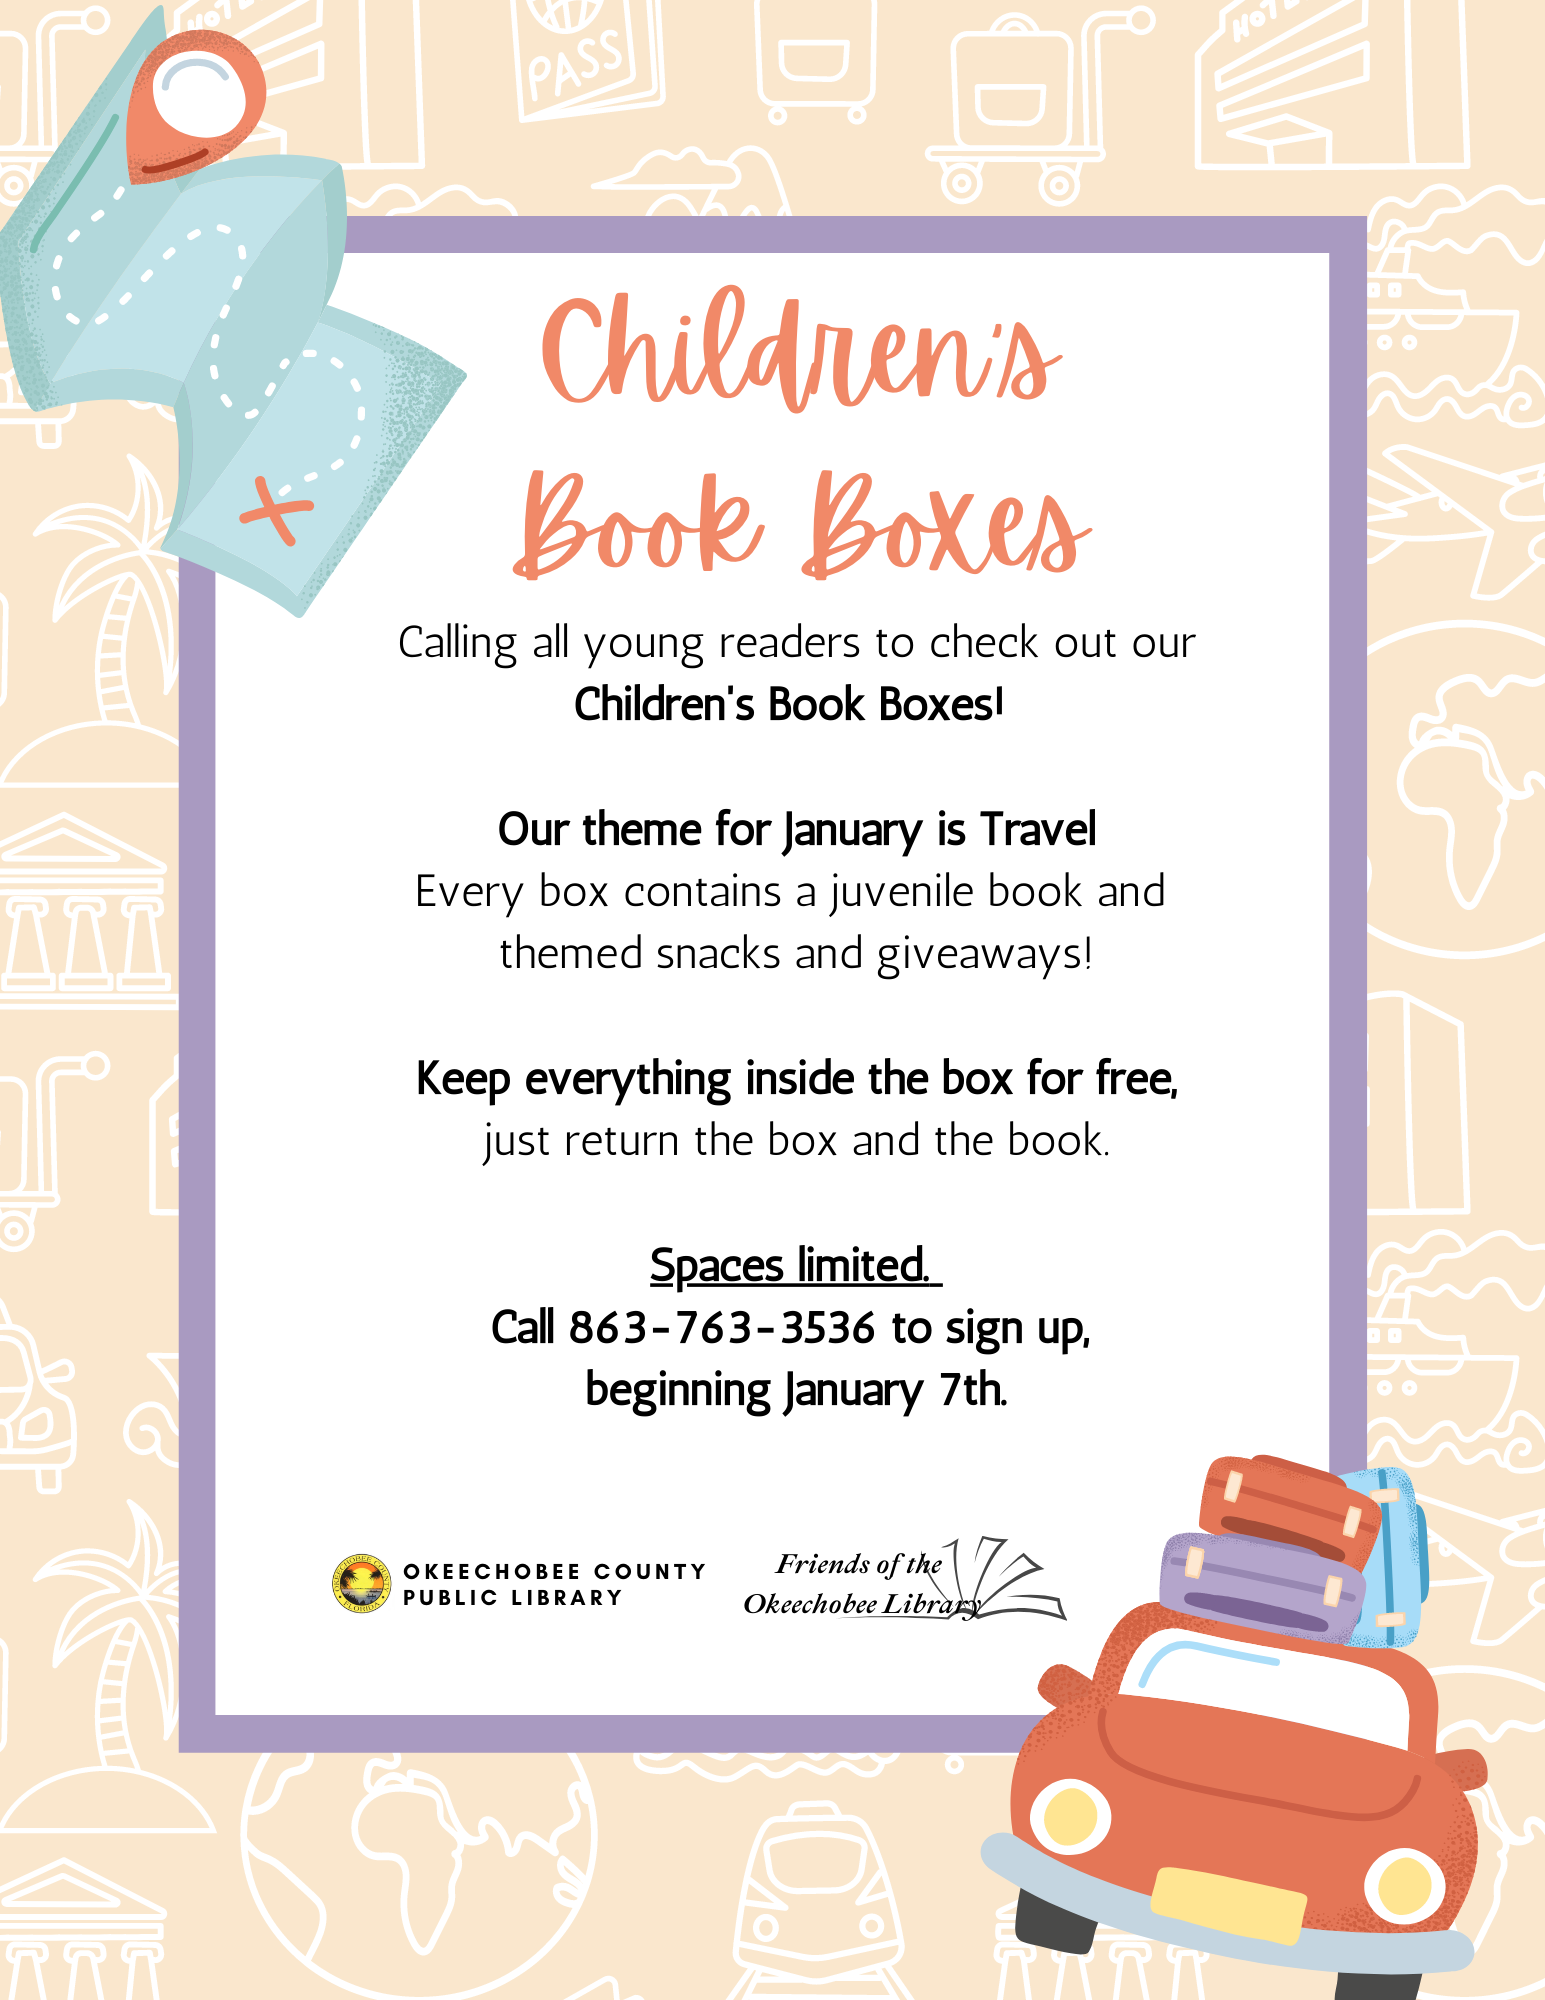 "January Children's Book Boxes! January's theme is travel! Every box contains a juvenile book and themed snacks and giveaways!"